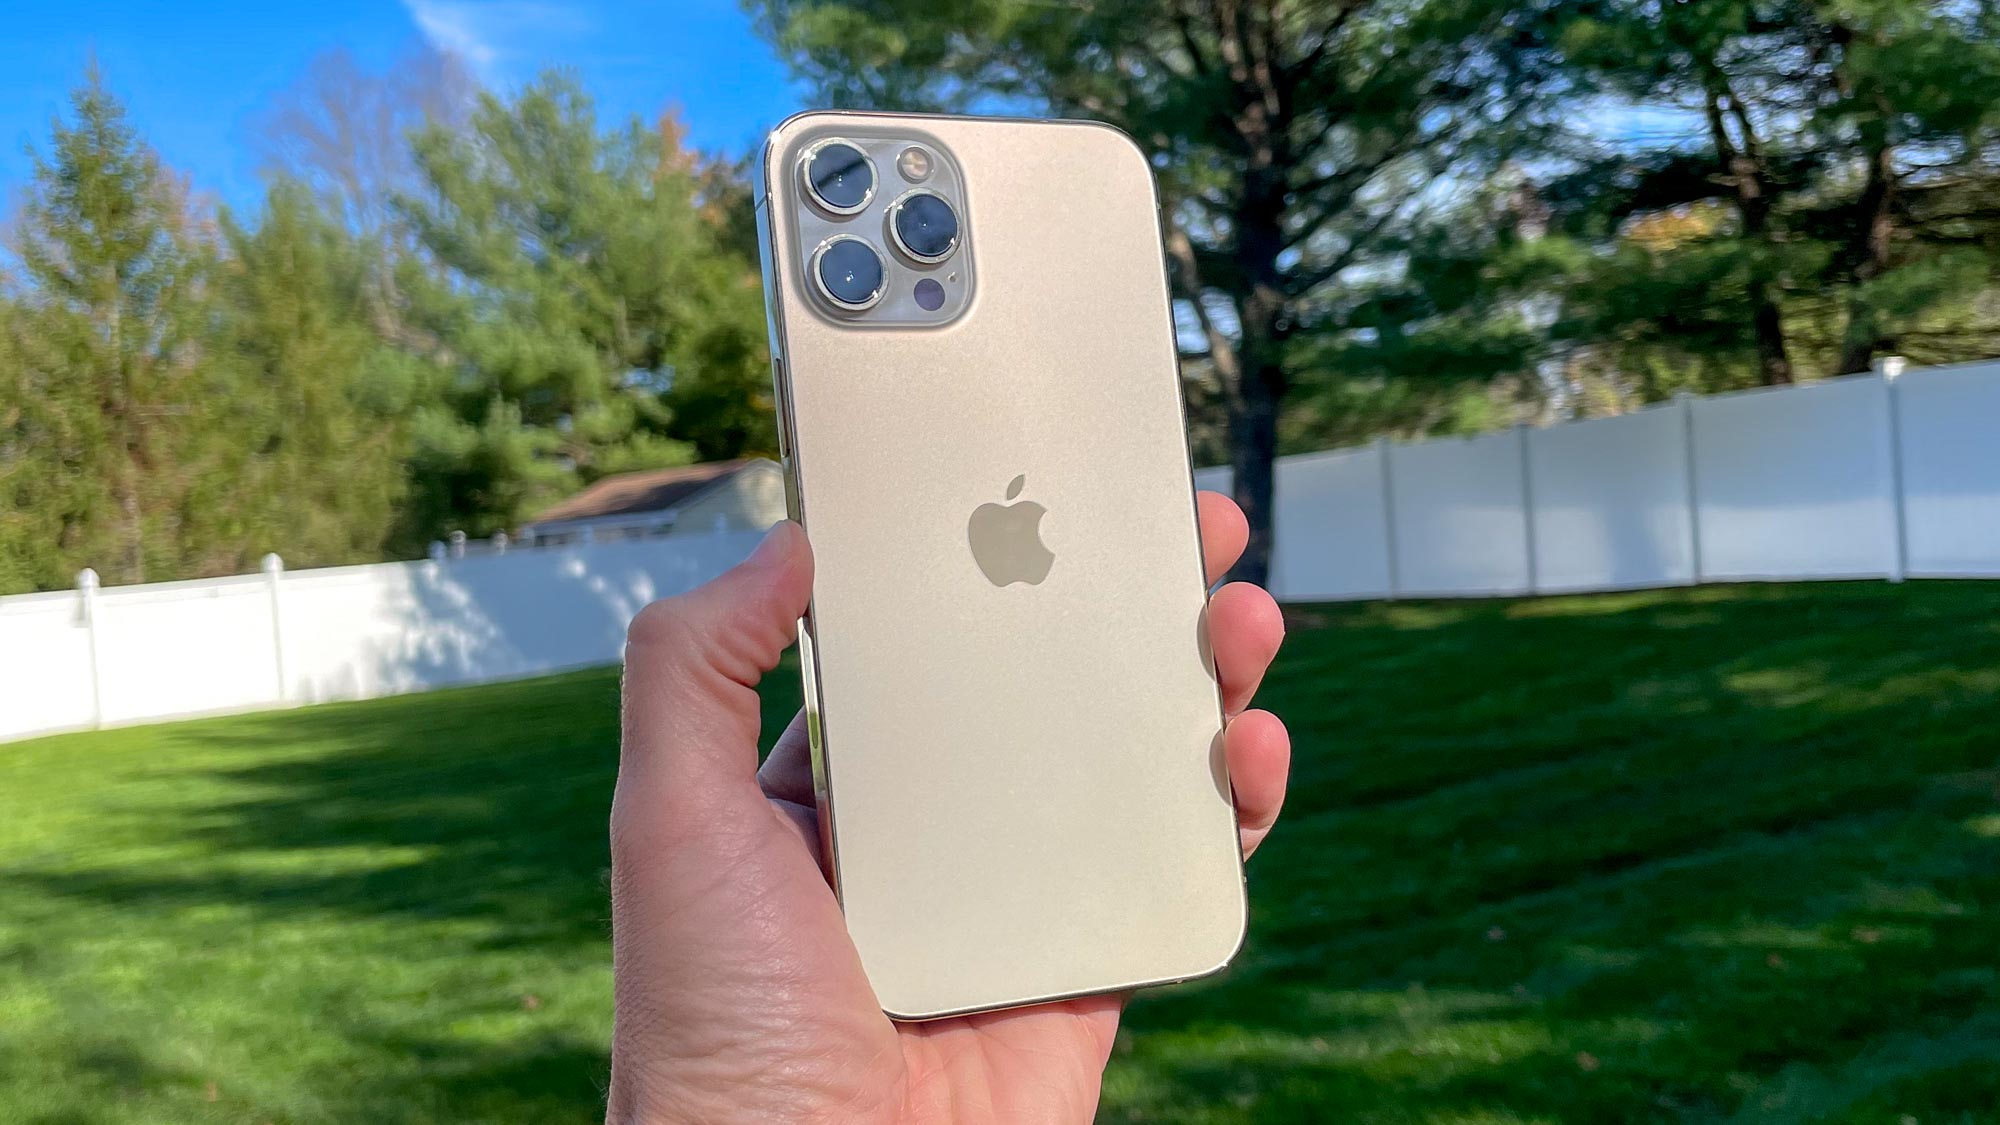 Iphone 12 Pro Max: a Powerhouse